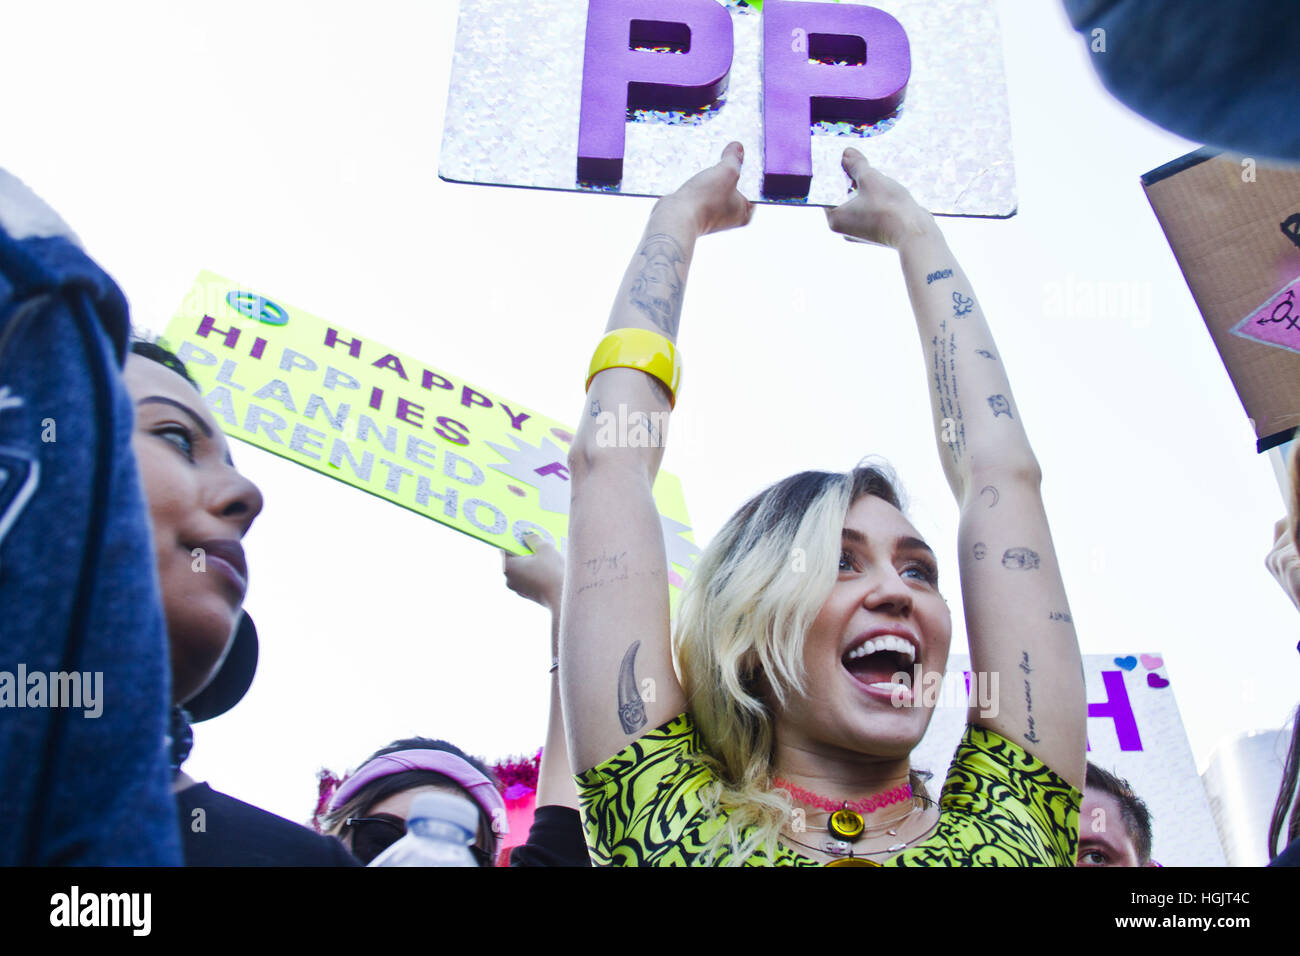 Los Angeles, California, USA. 21st Jan, 2017. MILEY CYRUS joins in as protesters fill the streets of downtown Los Angeles during the Women's March against President Trump. The march was held in in conjunction with similar events taking place in Washington and around the nation following the inauguration. Credit: Katrina Kochneva/ZUMA Wire/Alamy Live News Stock Photo